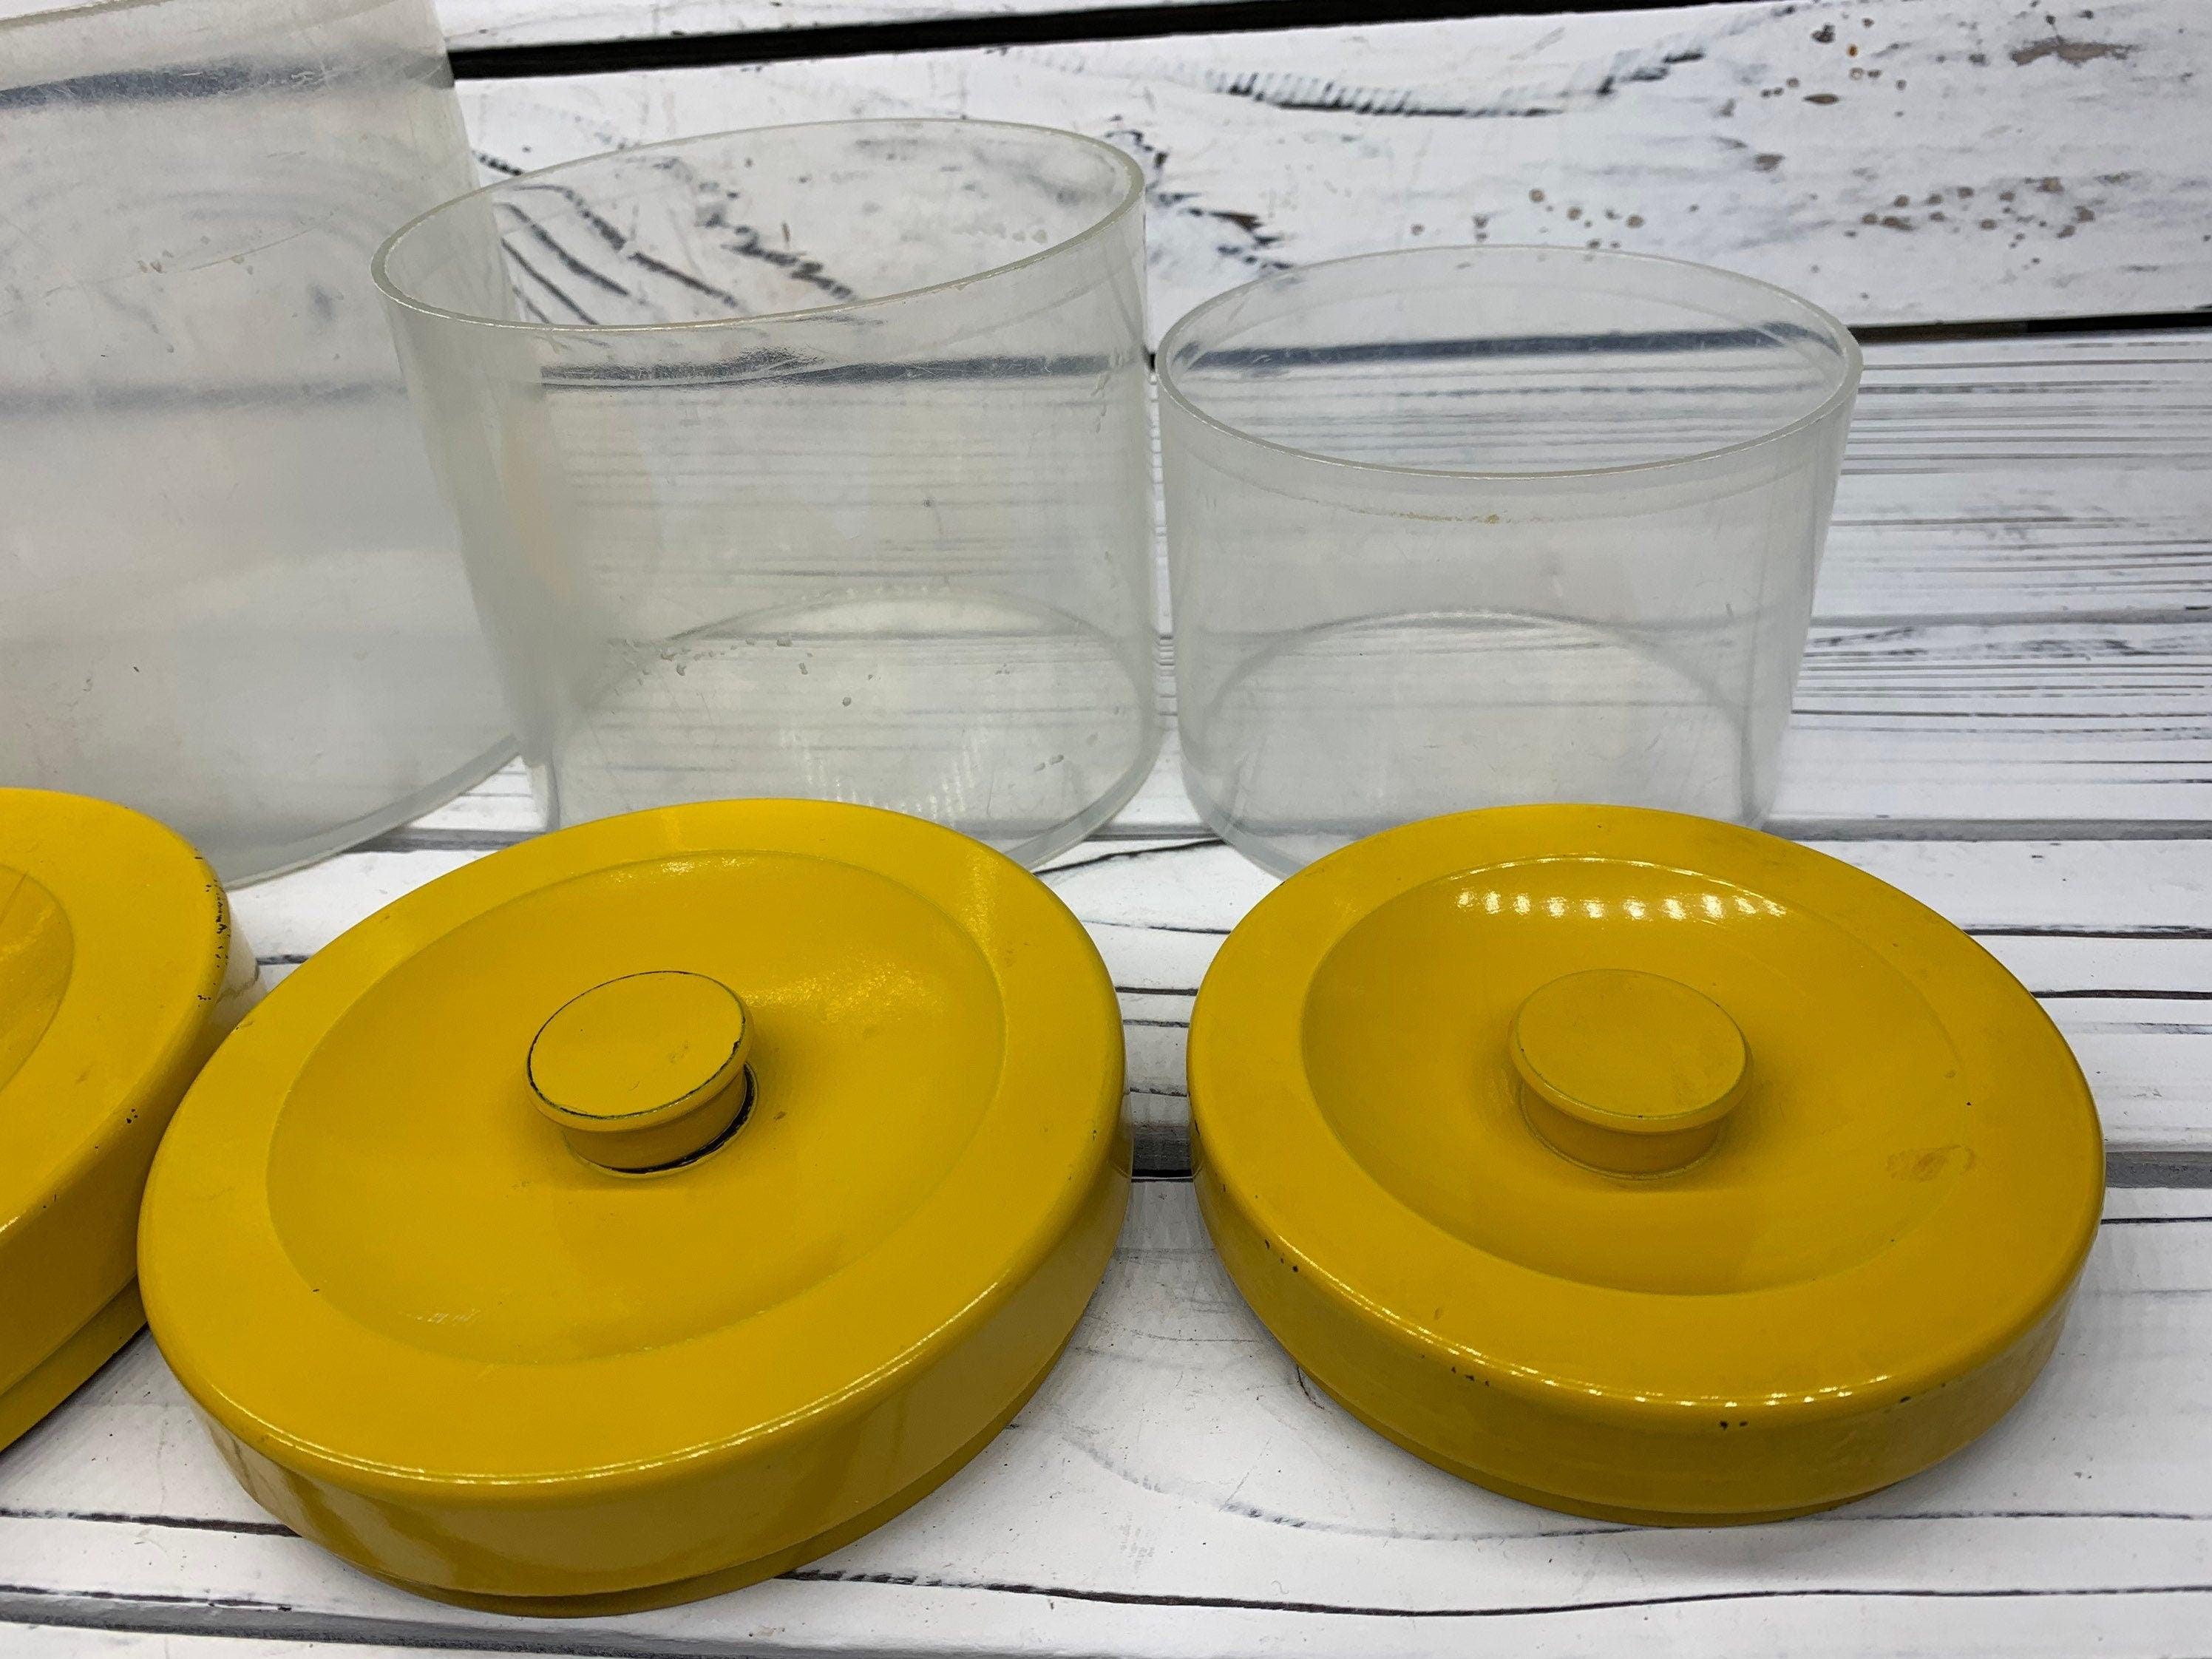 Vintage Canister Set, Set of 3 Clear Plastic Storage Containers